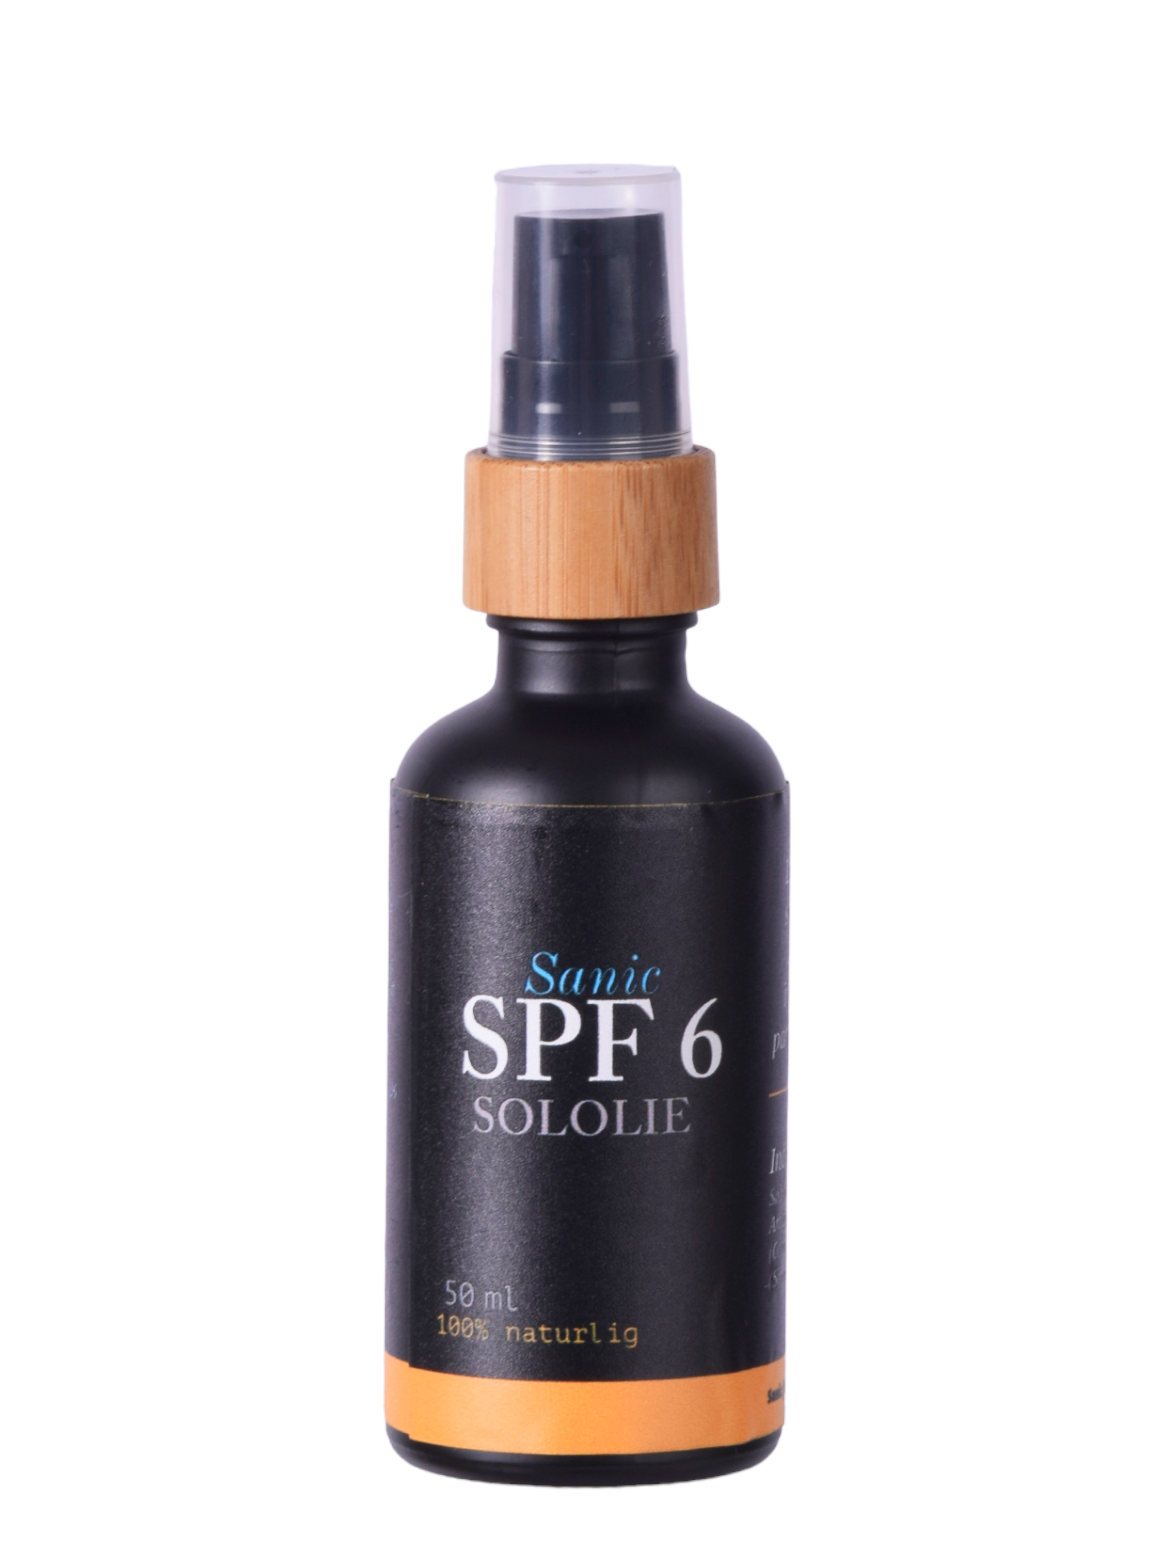 Sololie SPF 6